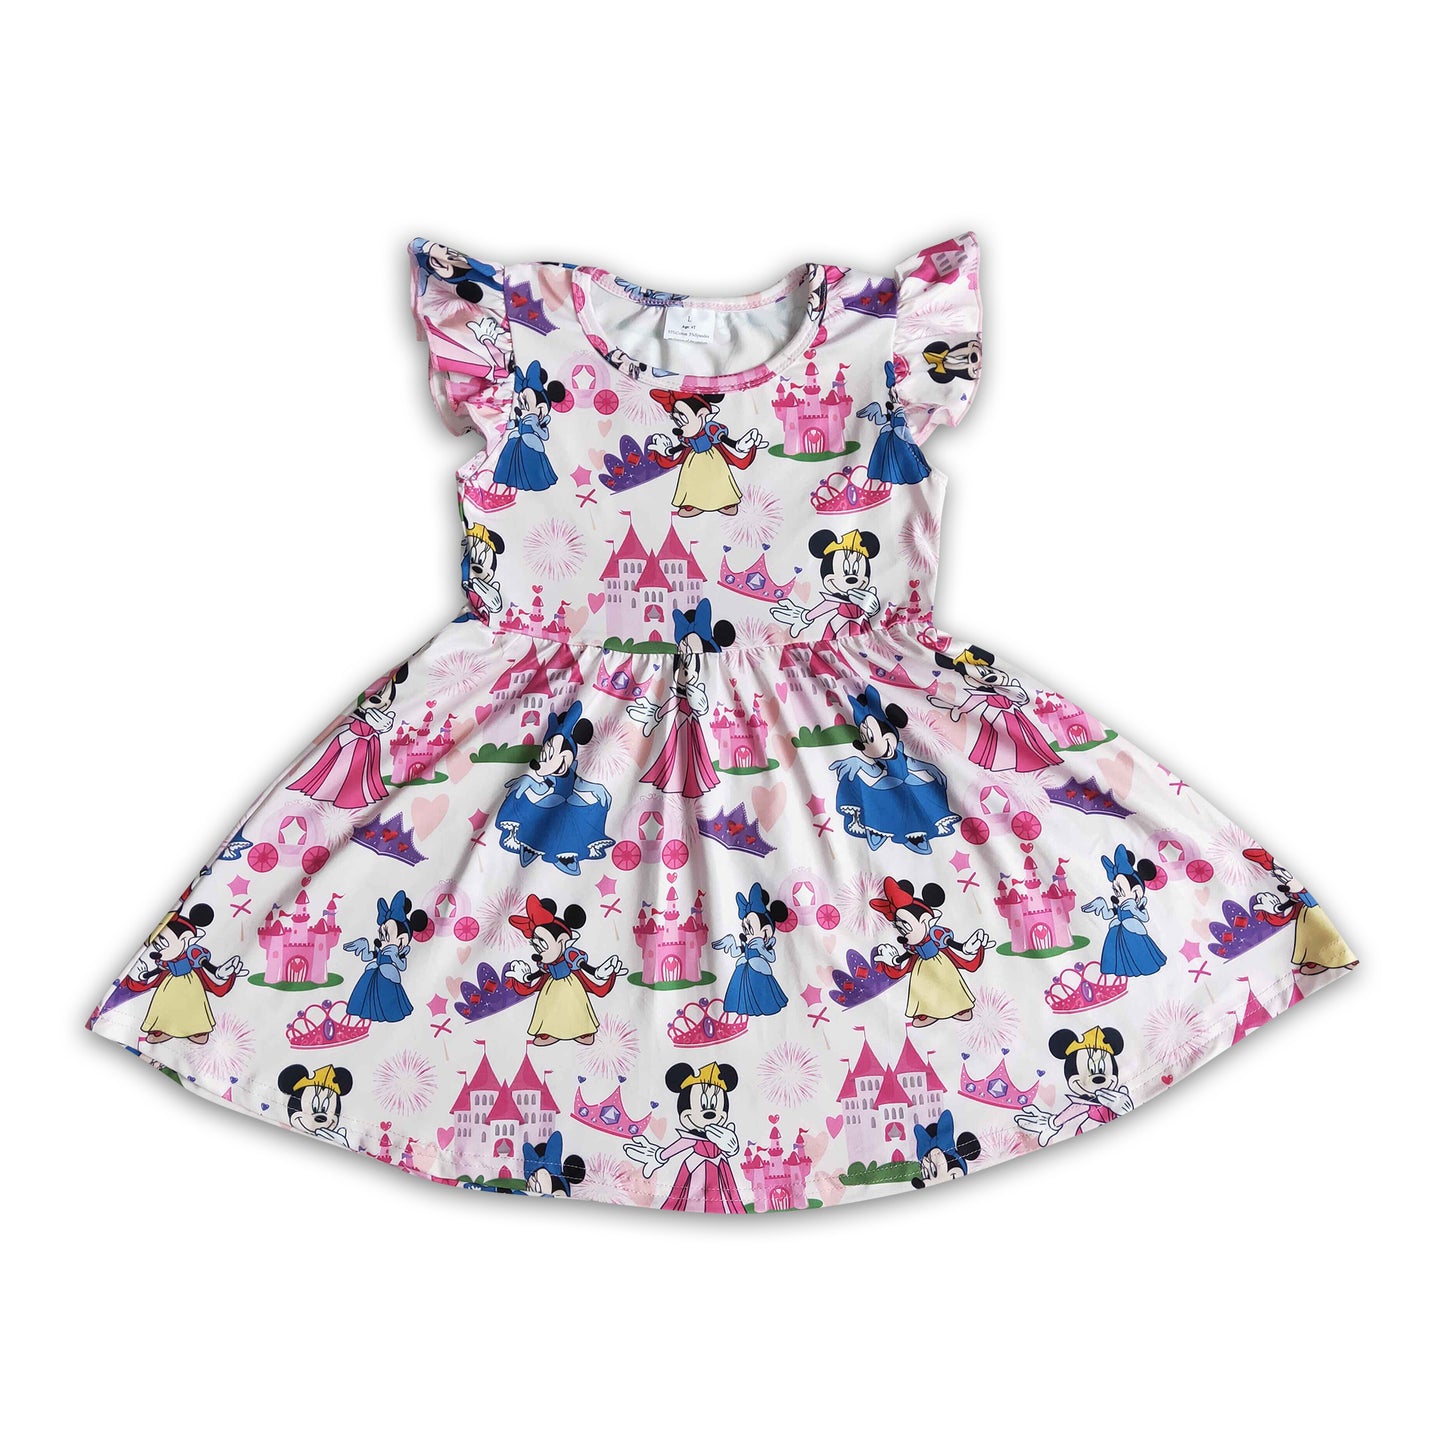 Cute mouse print flutter sleeve baby girls boutique dresses